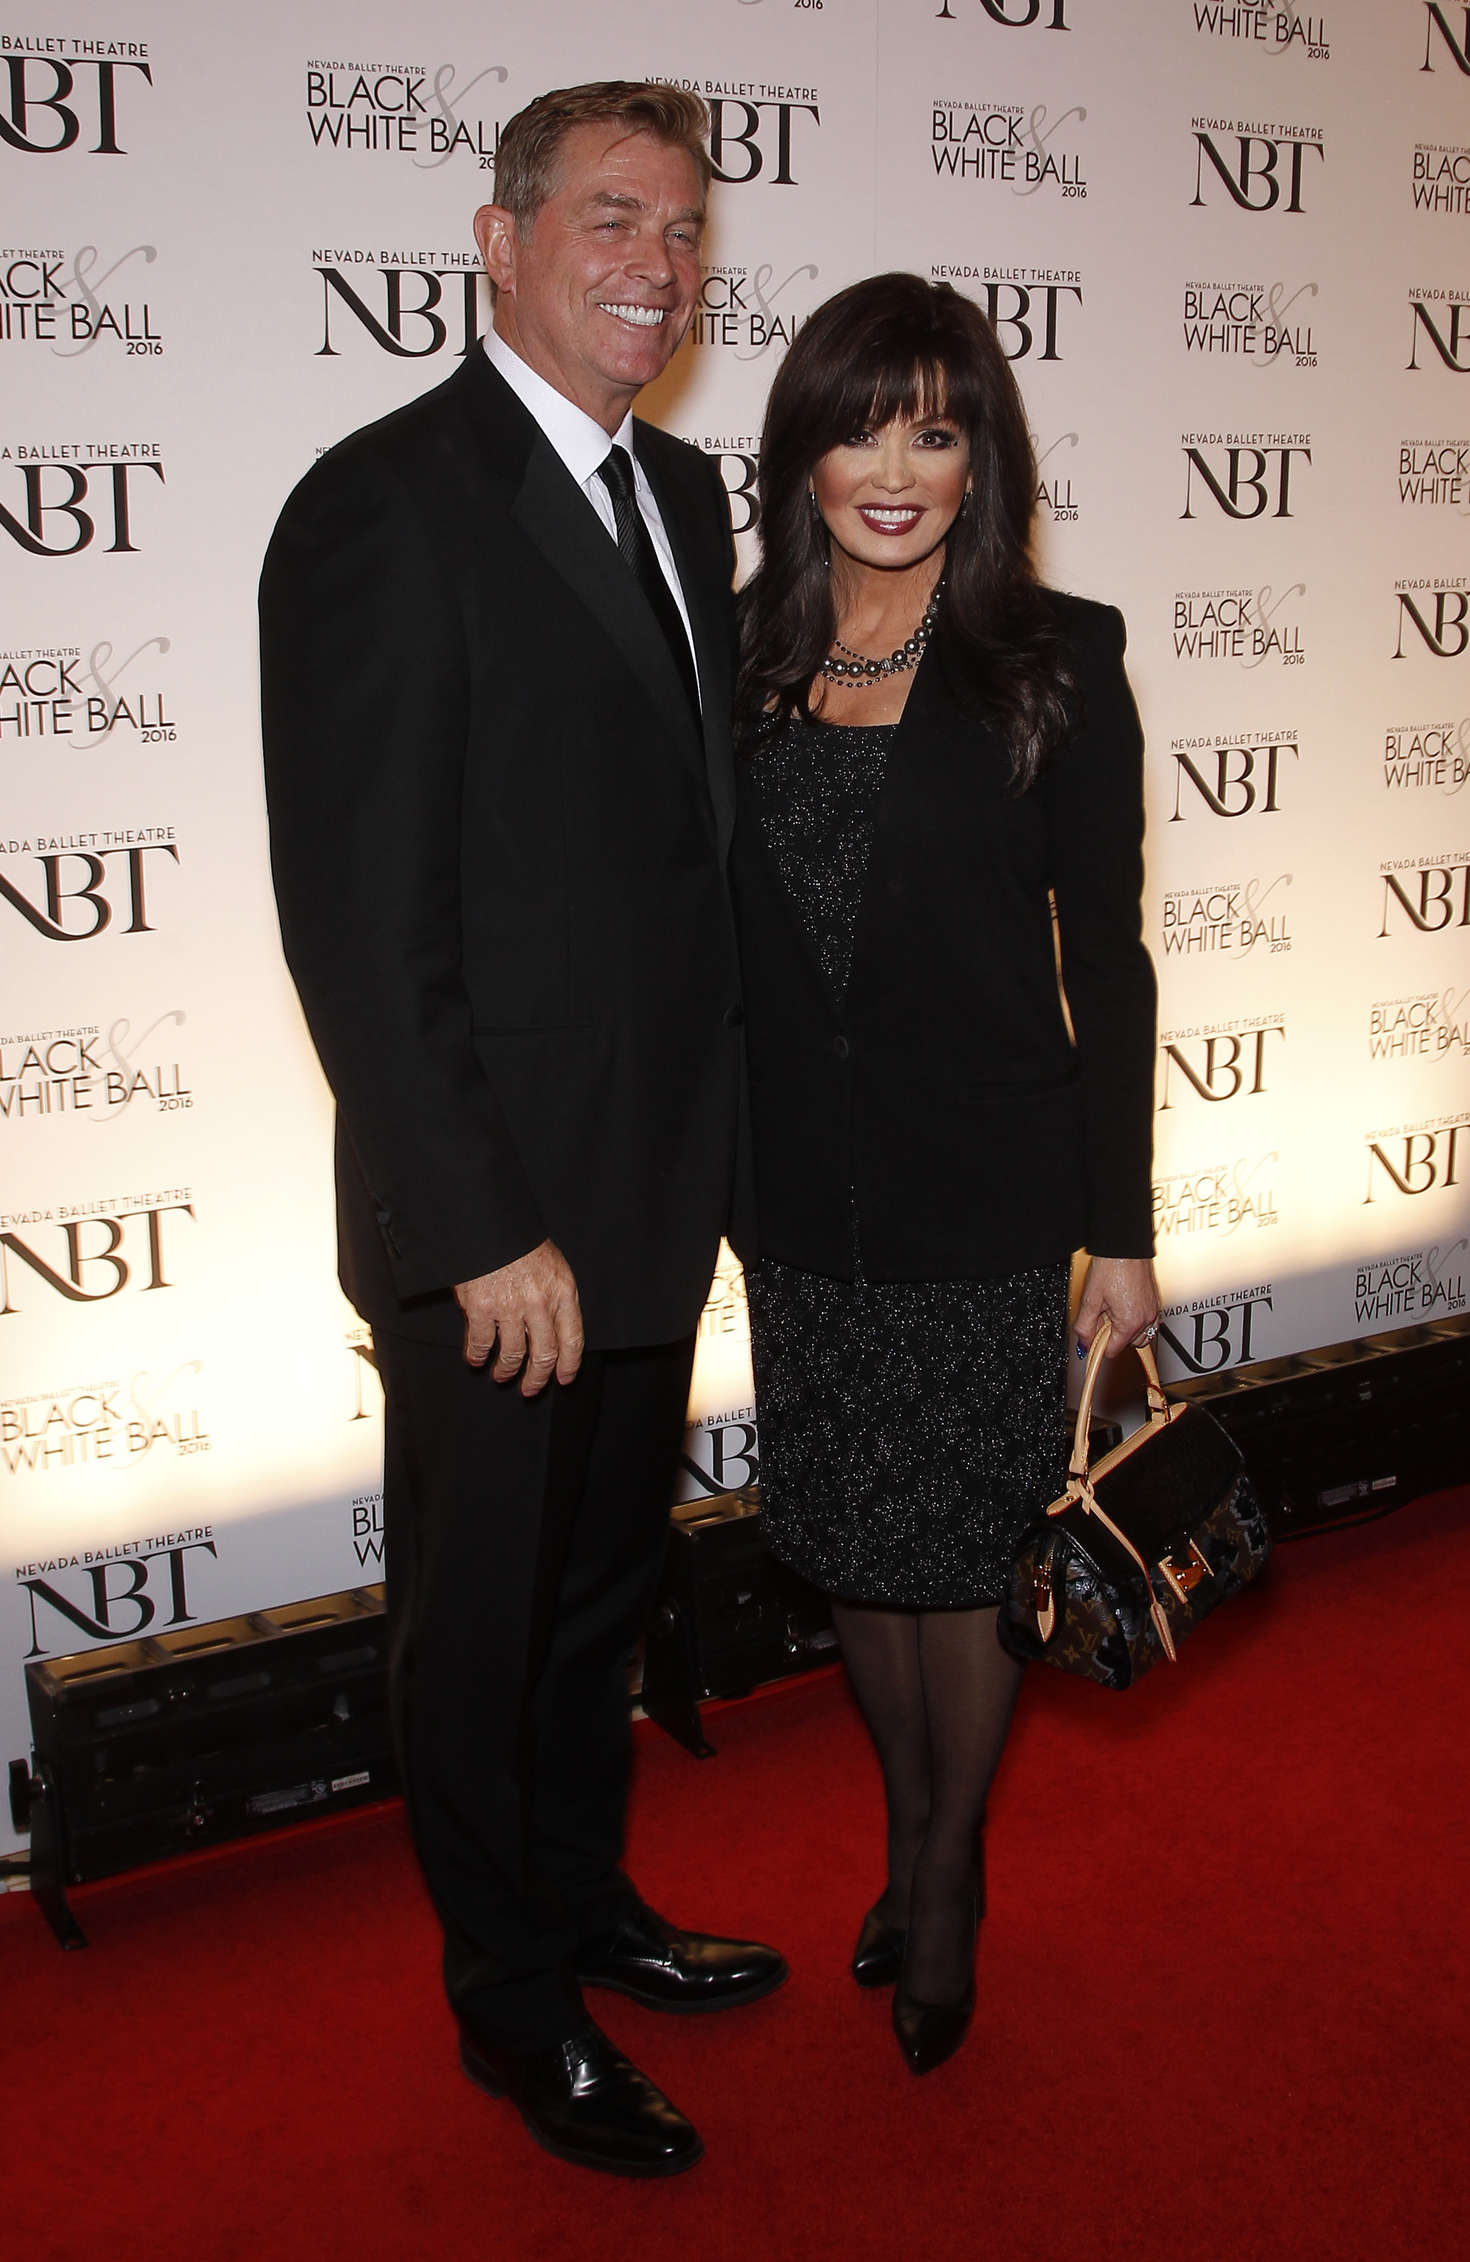 Marie Osmond Olivia Newton-John is honored as the NBT Woman of the Year in Las Vegas